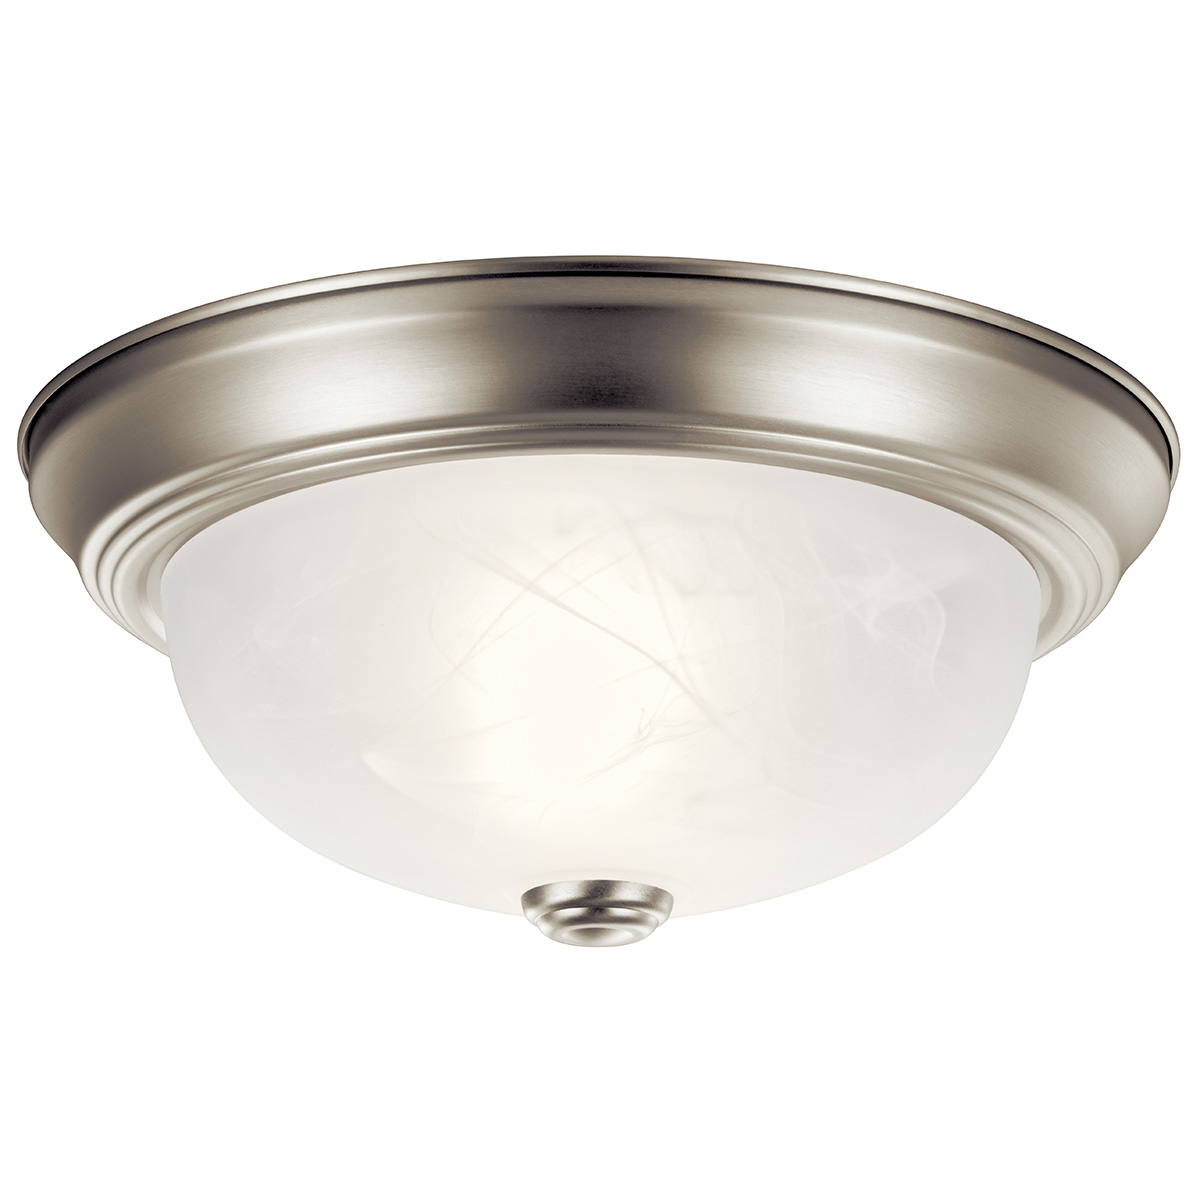 With just the right amount of added detail, this flush mount ceiling fixture provides not only the light you need, but the form as well.  A pleasing, yet unobtrusive look for any room where a functional light is needed. Alabaster swirl glass and Brushed Nickel finish. 2 light. 60 watt max. Diameter 11 ½in., height 6 ½in..